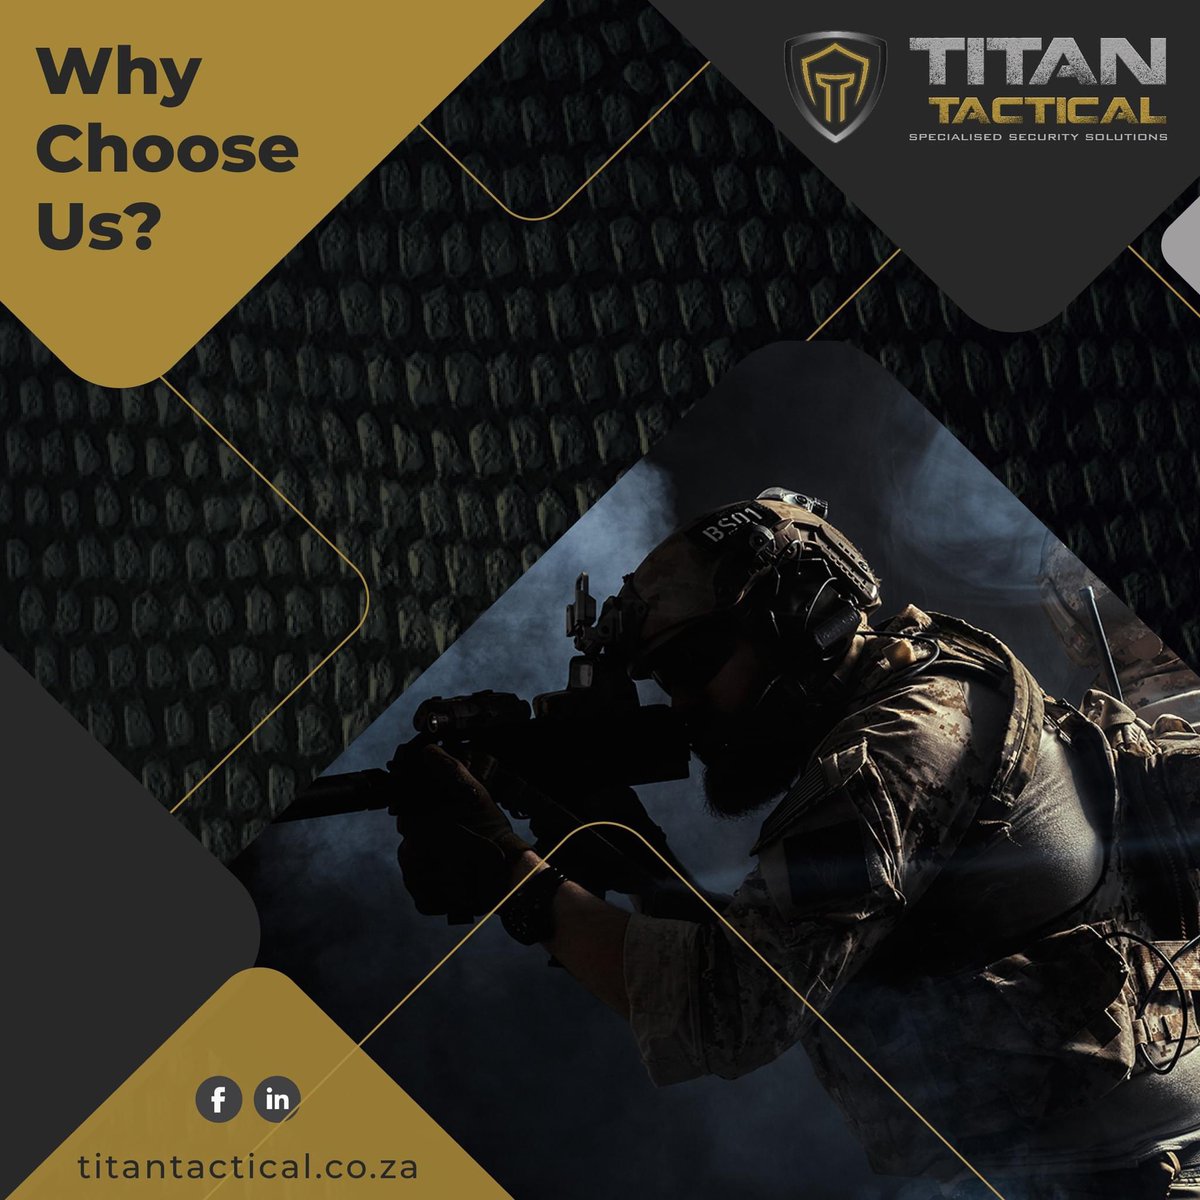 🤝 Why choose Titan Tactical? Because we deliver results. Our team is dedicated to providing you with the highest level of security and peace of mind. Choose us for your security needs. #ChooseUs #SecurityExperts #TitanTactical